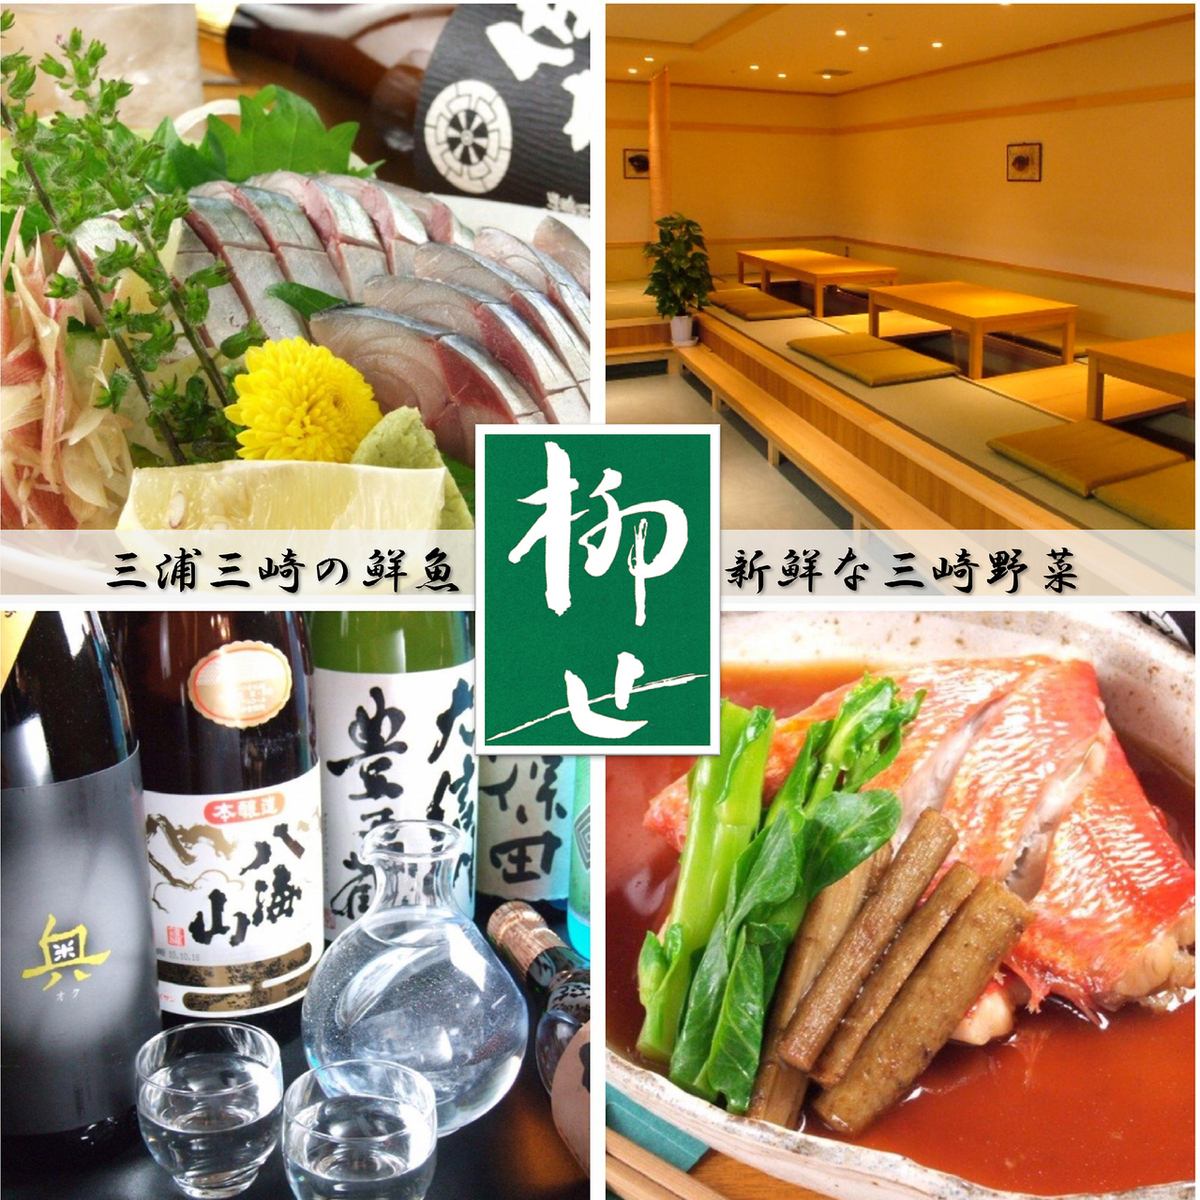 [Omakase plan] using luxurious Miura seafood and Hayama beef purchased every morning for banquets and farewell parties